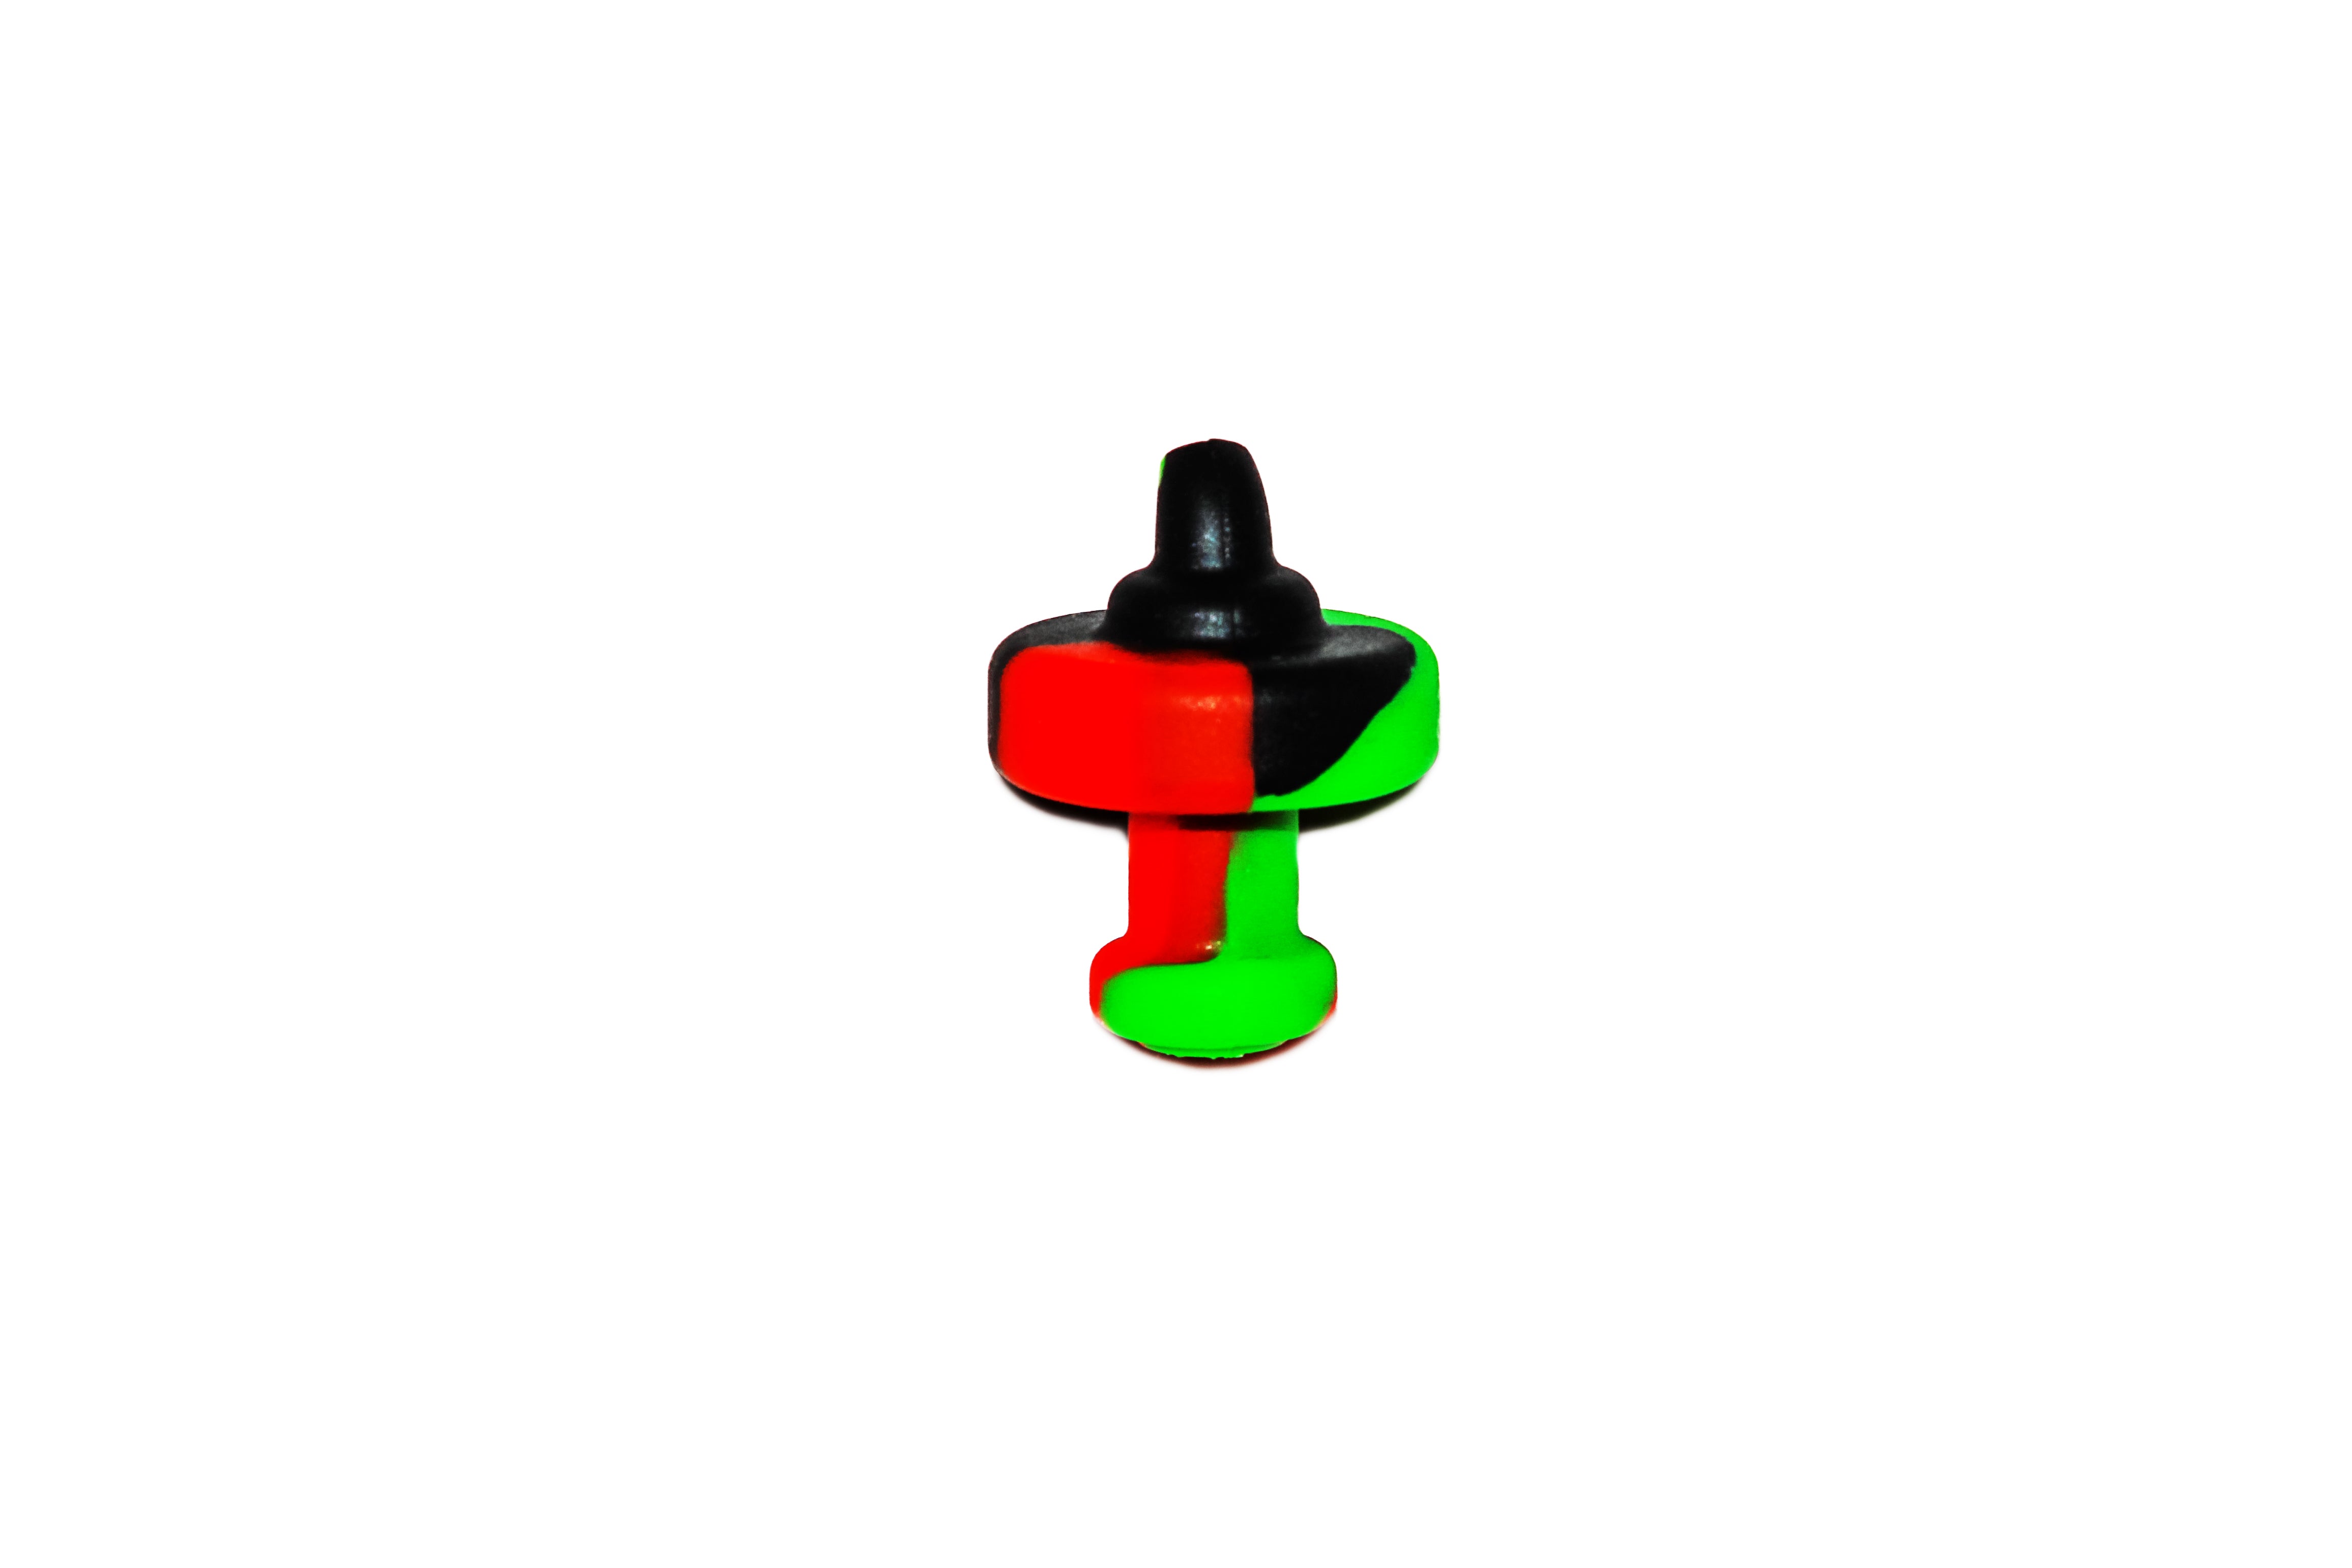 Silicone Carb Cap - Directional Flow (Small)